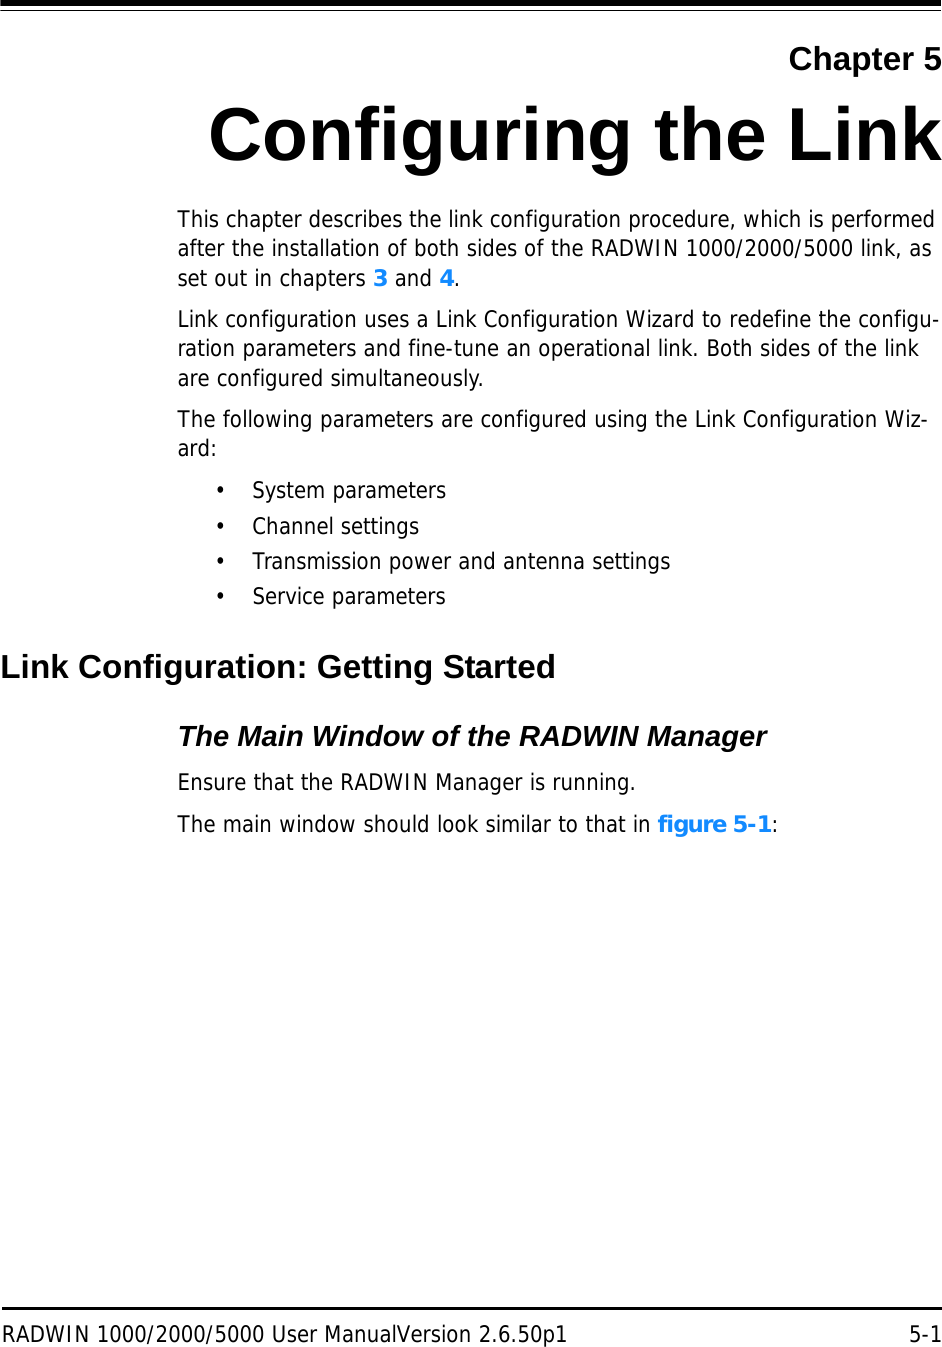 RADWIN 1000/2000/5000 User ManualVersion 2.6.50p1 5-1Chapter 5Configuring the LinkThis chapter describes the link configuration procedure, which is performed after the installation of both sides of the RADWIN 1000/2000/5000 link, as set out in chapters 3 and 4.Link configuration uses a Link Configuration Wizard to redefine the configu-ration parameters and fine-tune an operational link. Both sides of the link are configured simultaneously.The following parameters are configured using the Link Configuration Wiz-ard:• System parameters• Channel settings• Transmission power and antenna settings•Service parametersLink Configuration: Getting StartedThe Main Window of the RADWIN ManagerEnsure that the RADWIN Manager is running.The main window should look similar to that in figure 5-1: